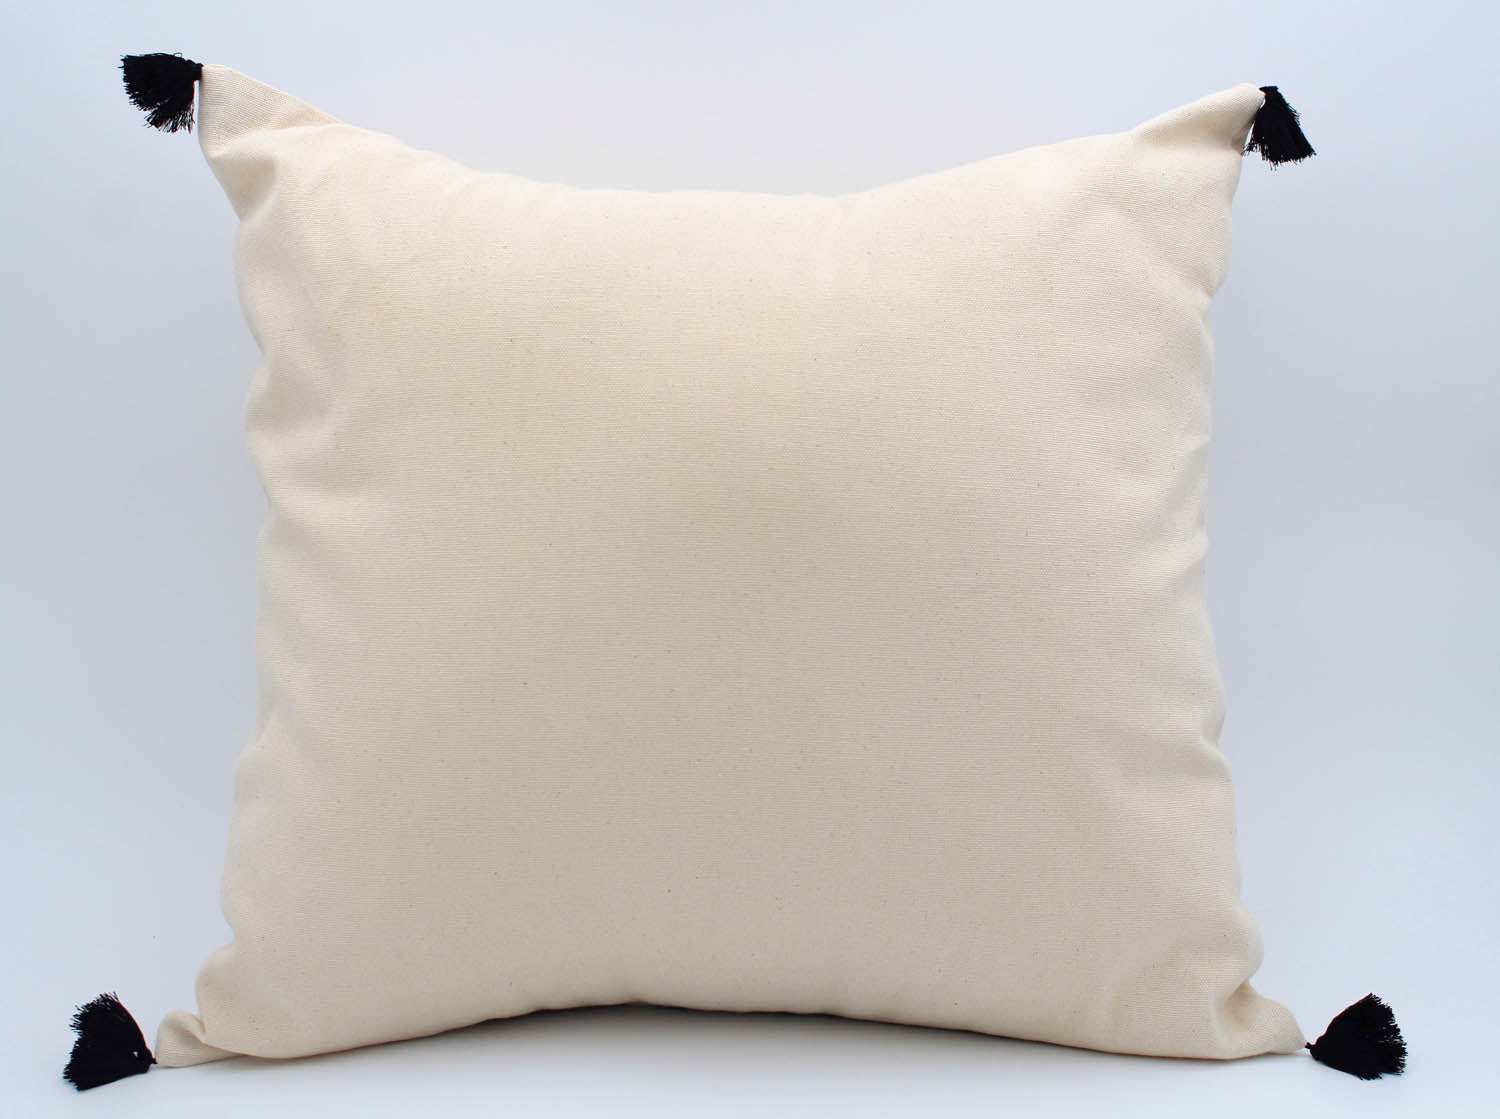 The Bogotá Pillow Collection: Square